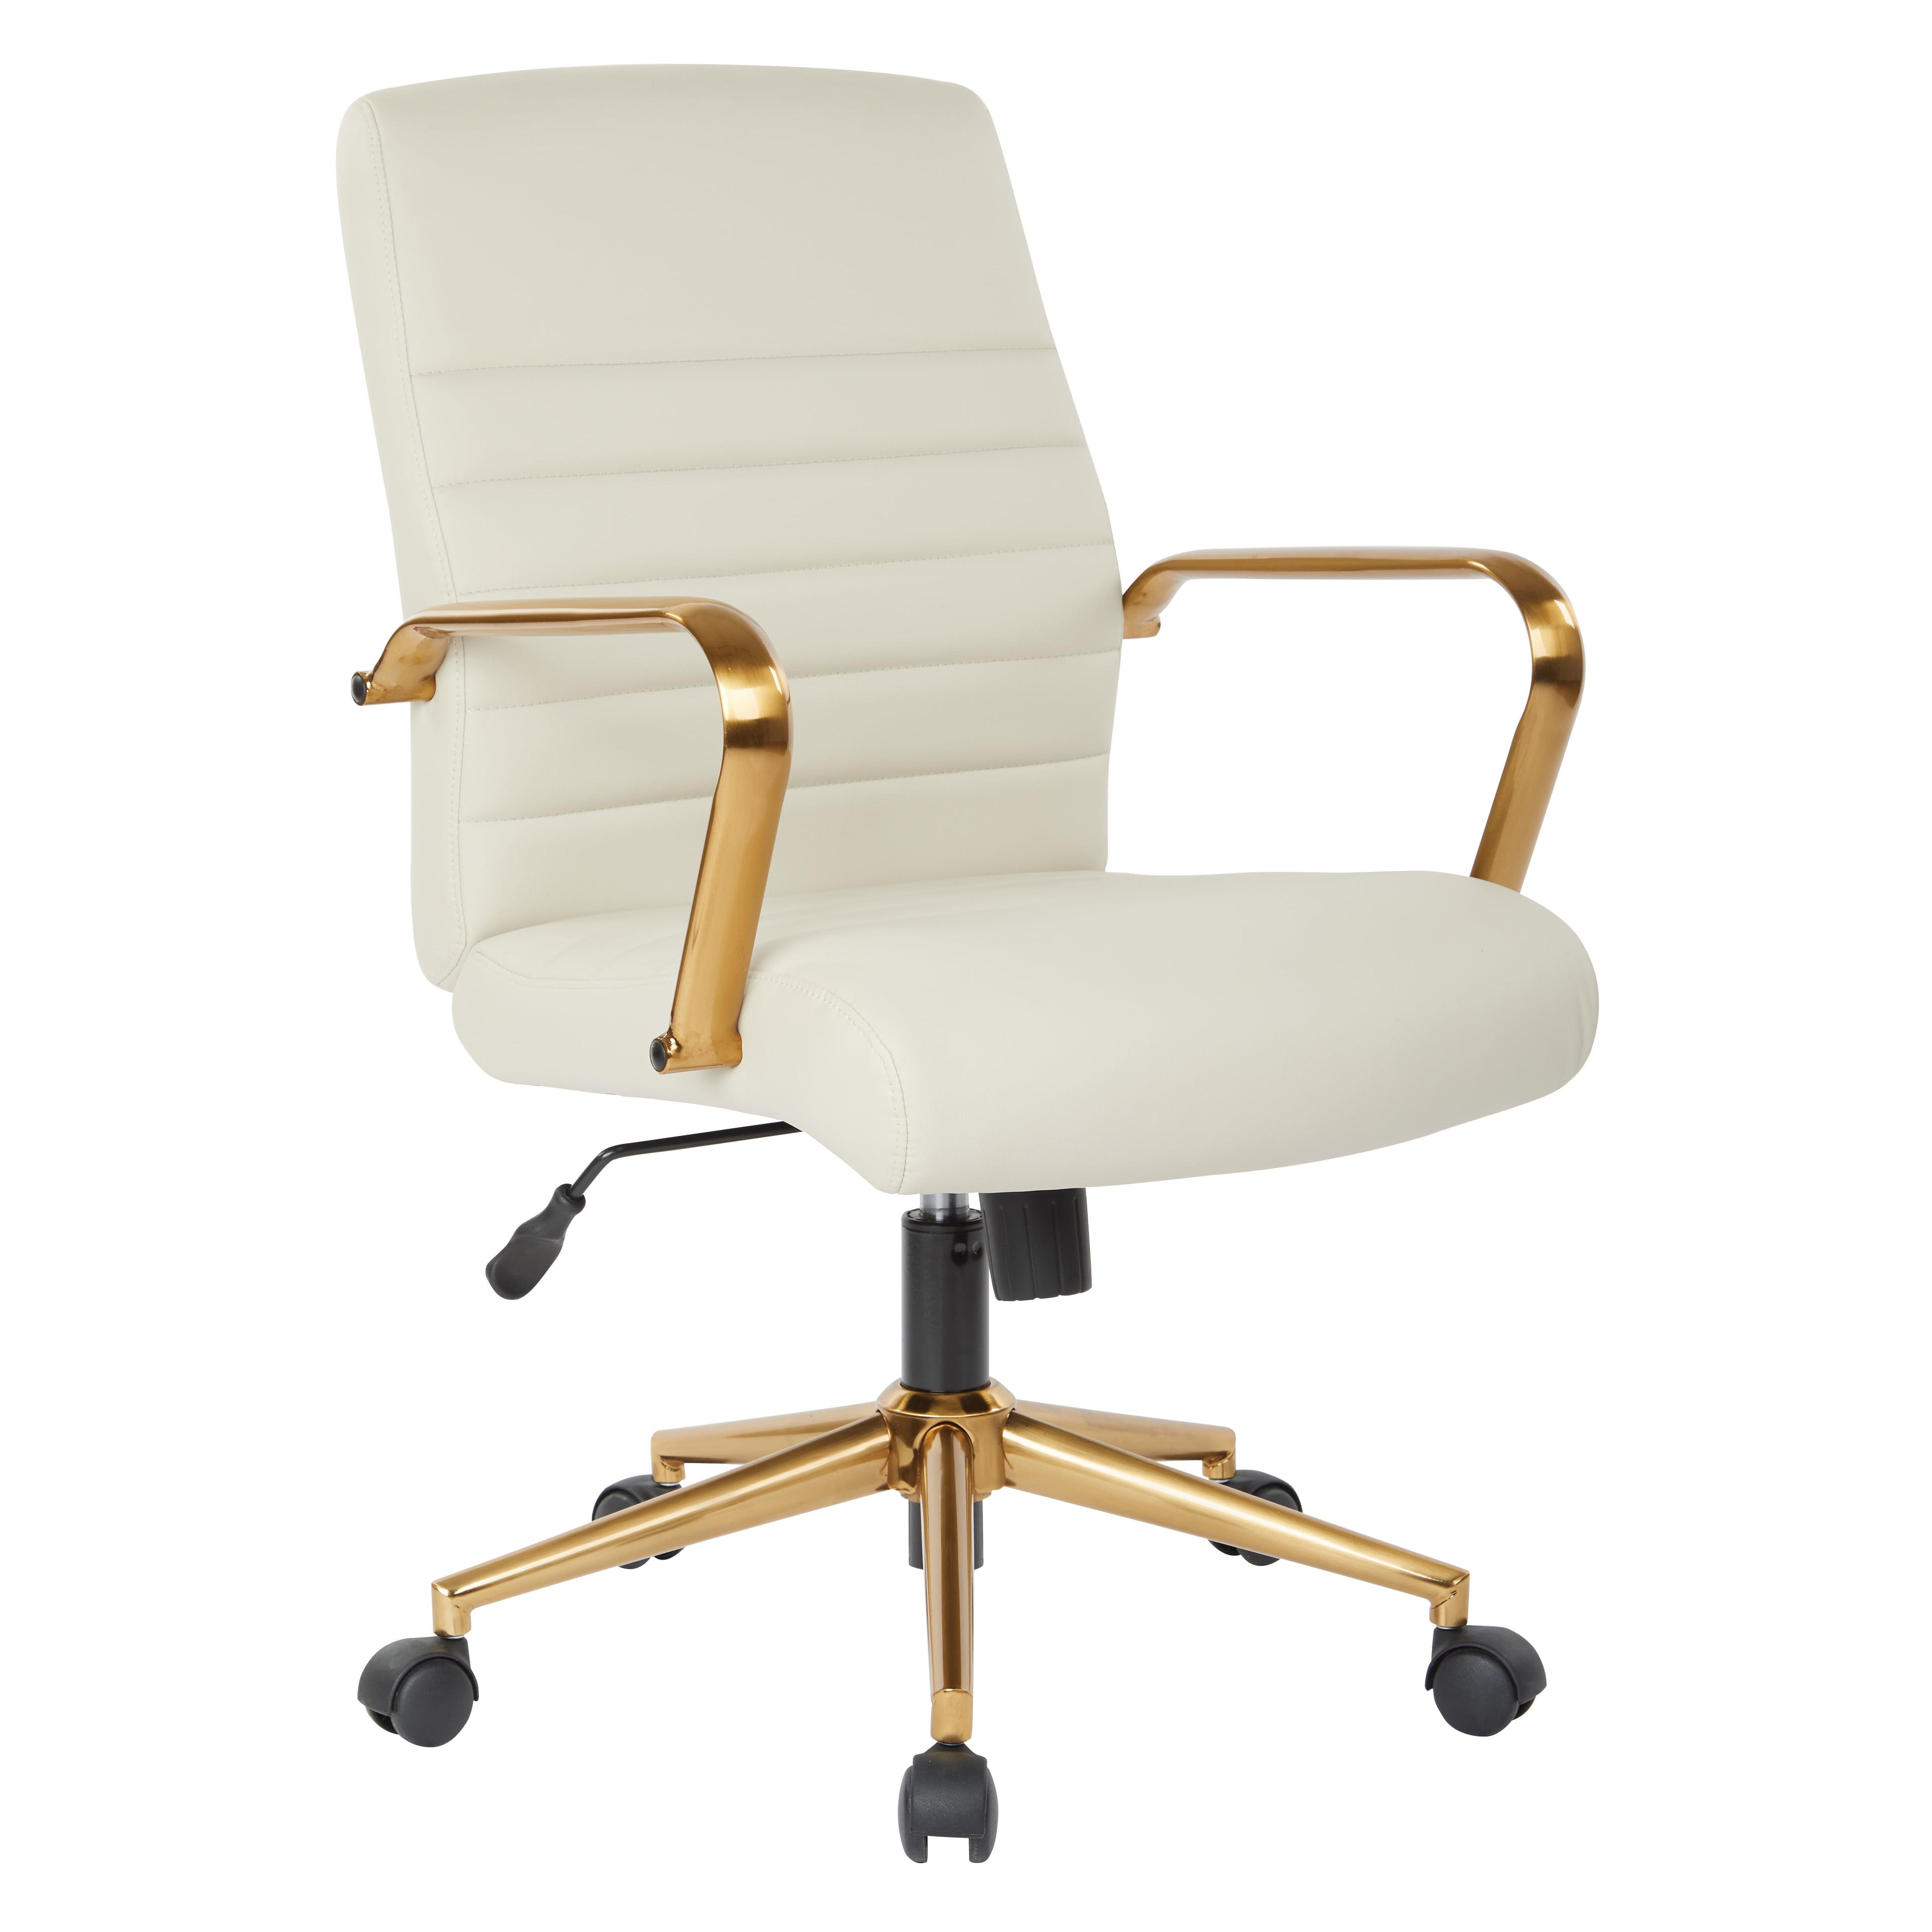 Baldwin Cream Faux Leather Swivel Task Chair with Gold Accents